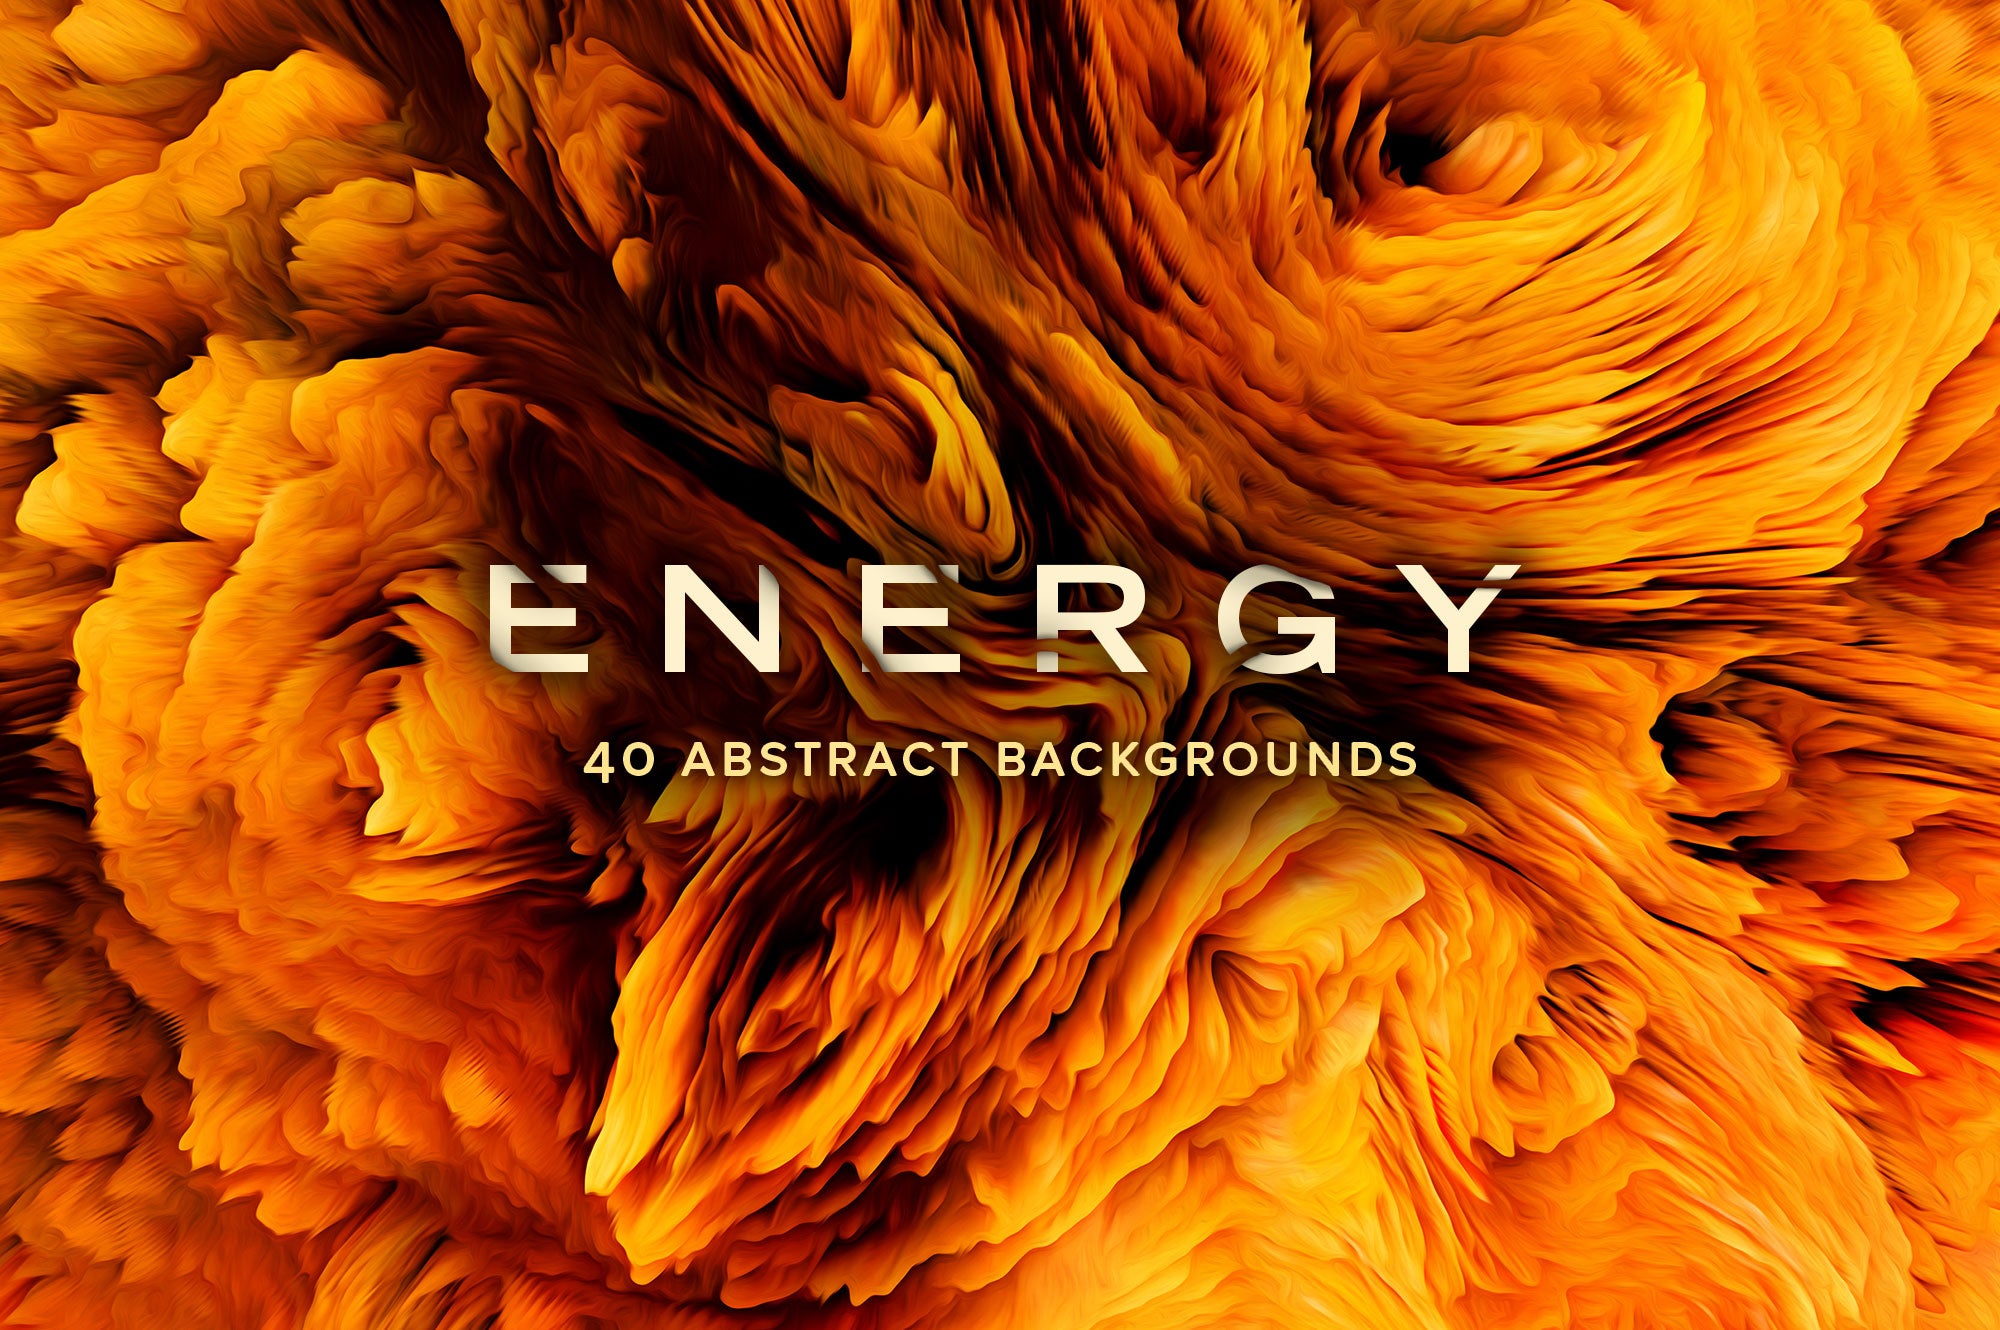 Energy: 40 Abstract Backgrounds